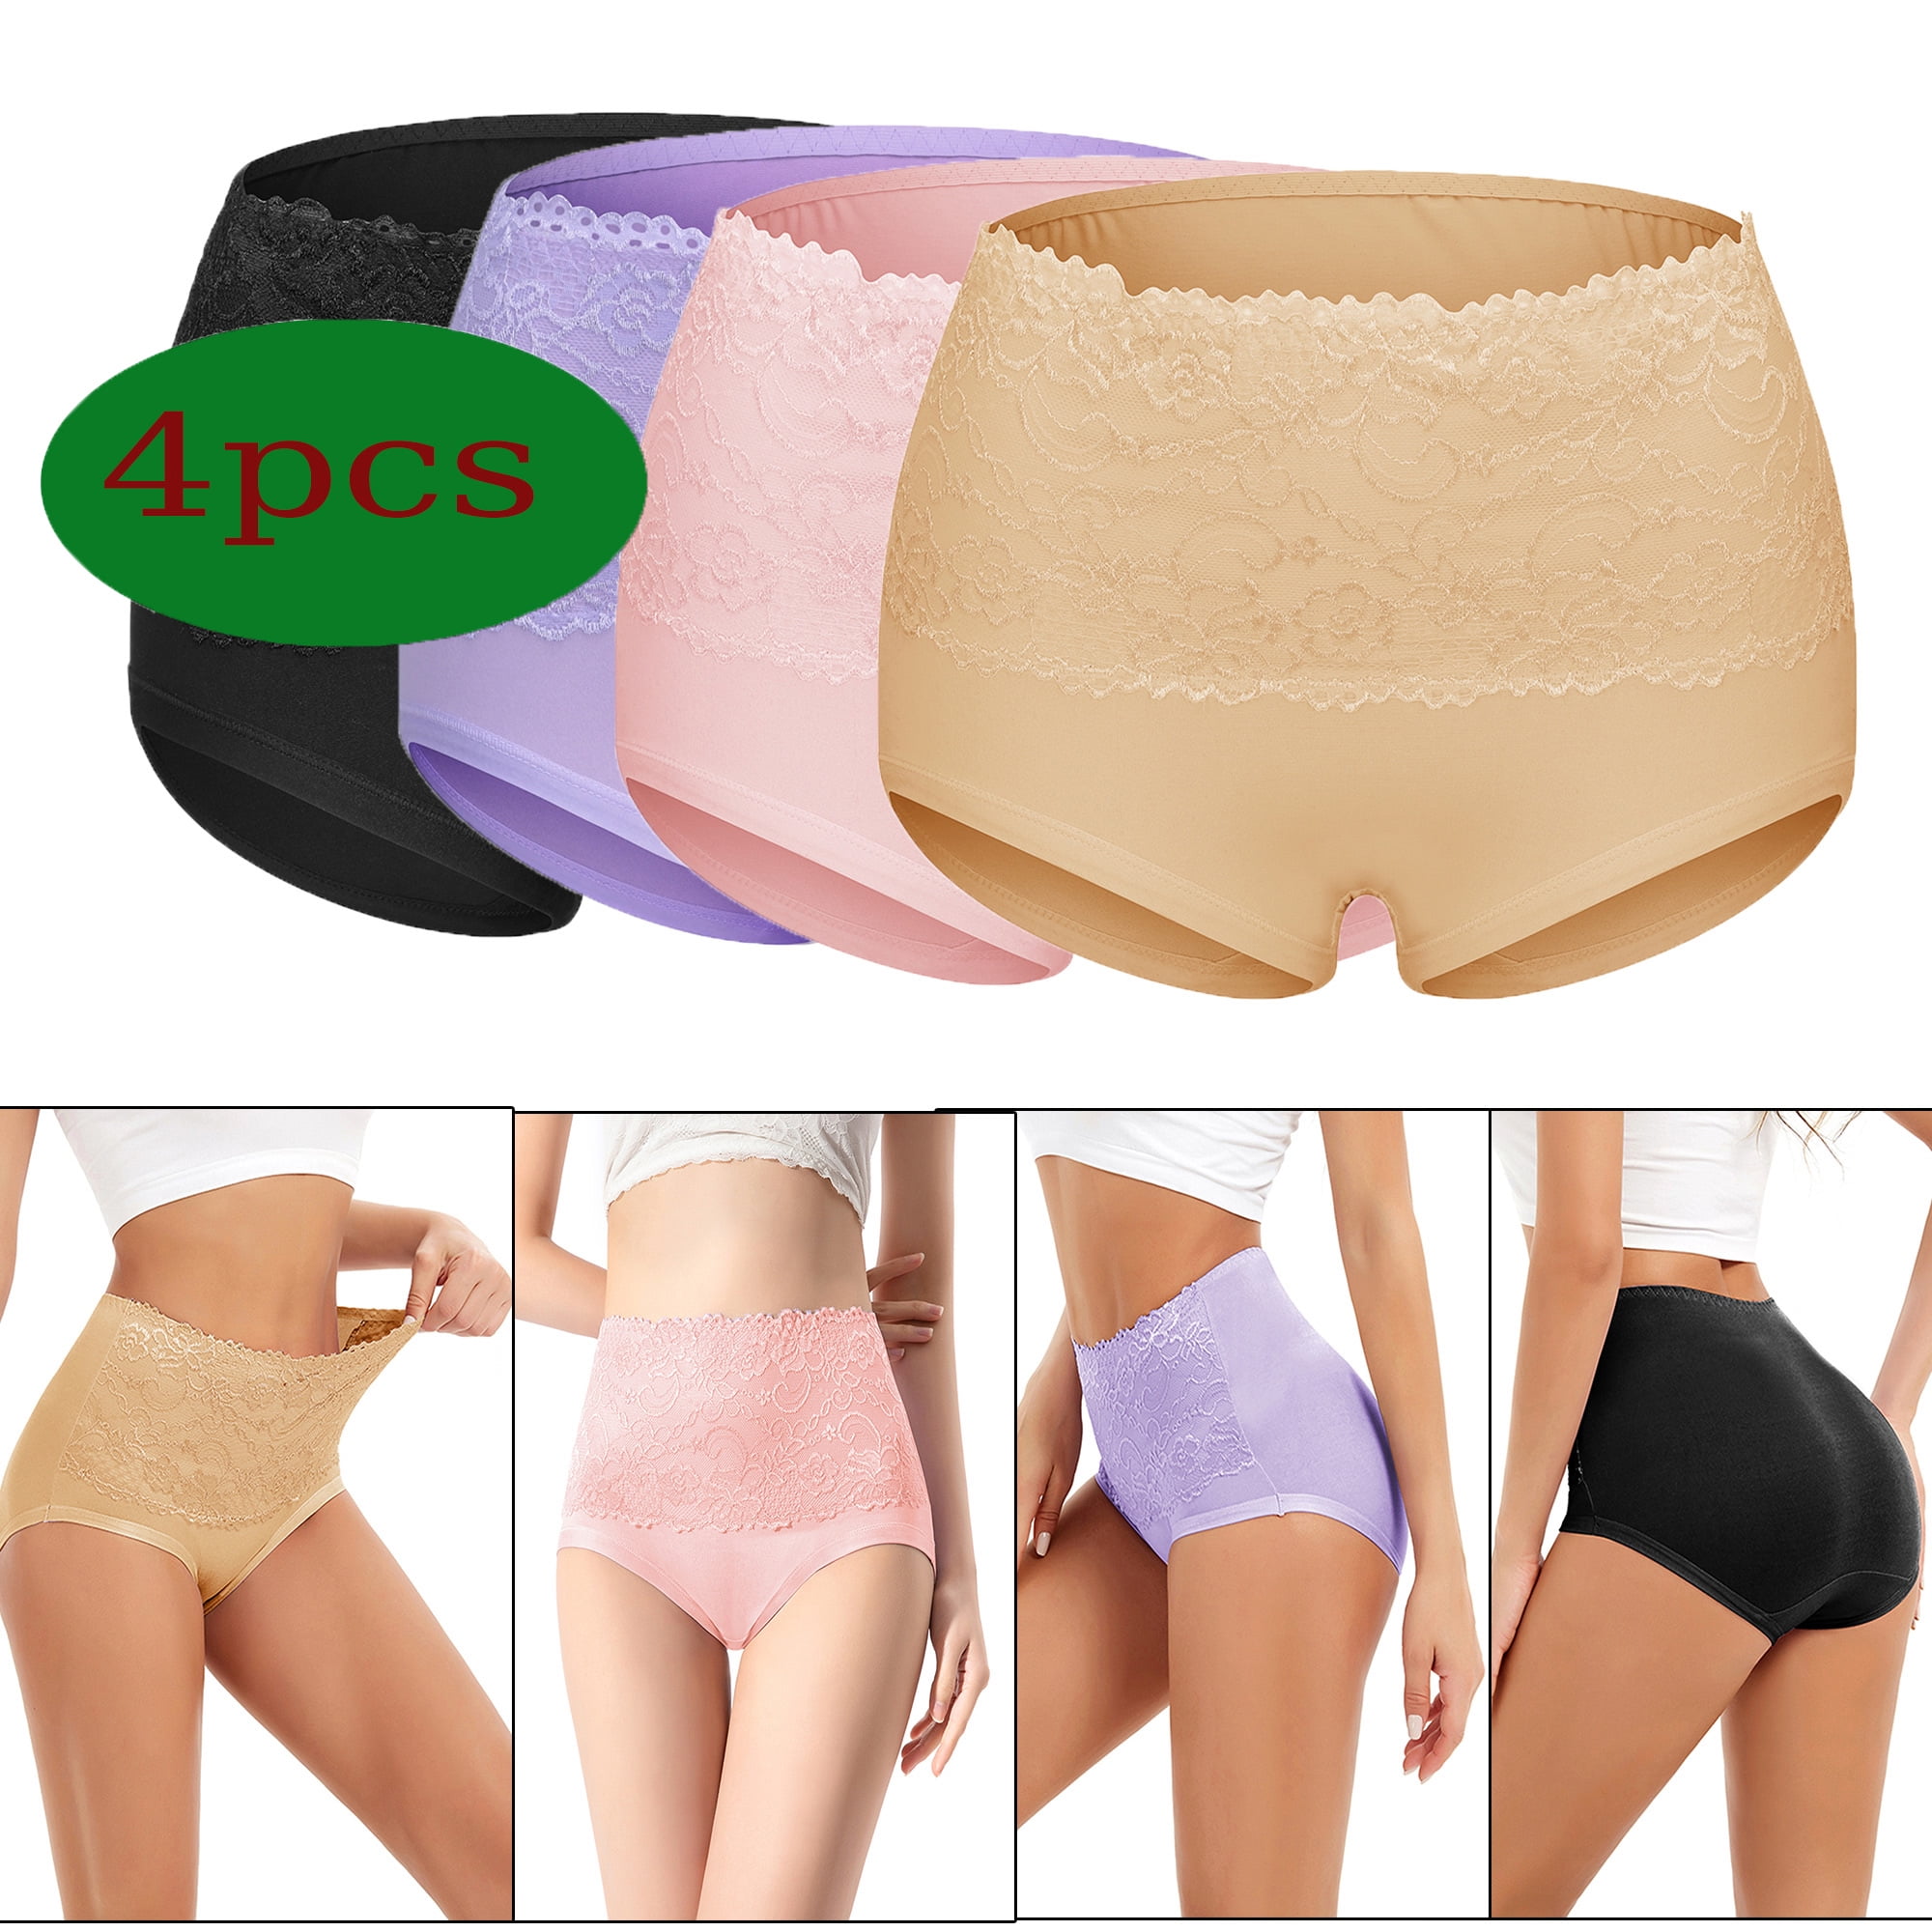 Women's High Waist Lace Brief Panties - 4-Pack Soft Malaysia